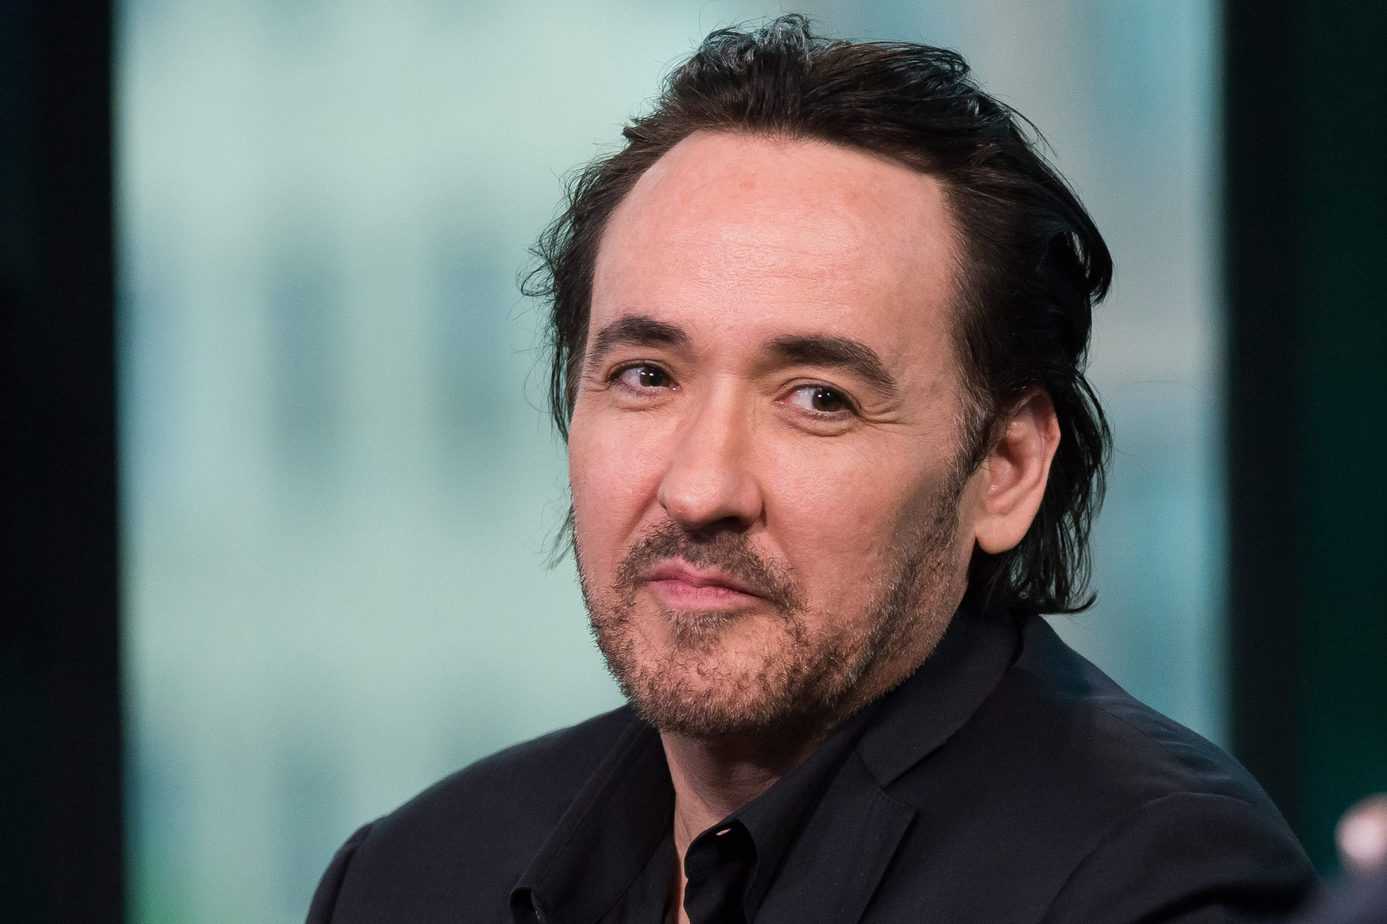 Actor and Chicagoan John Cusack is tending on social media after getting into it with Barstool Sports' "White Sox Dave" on Sunday